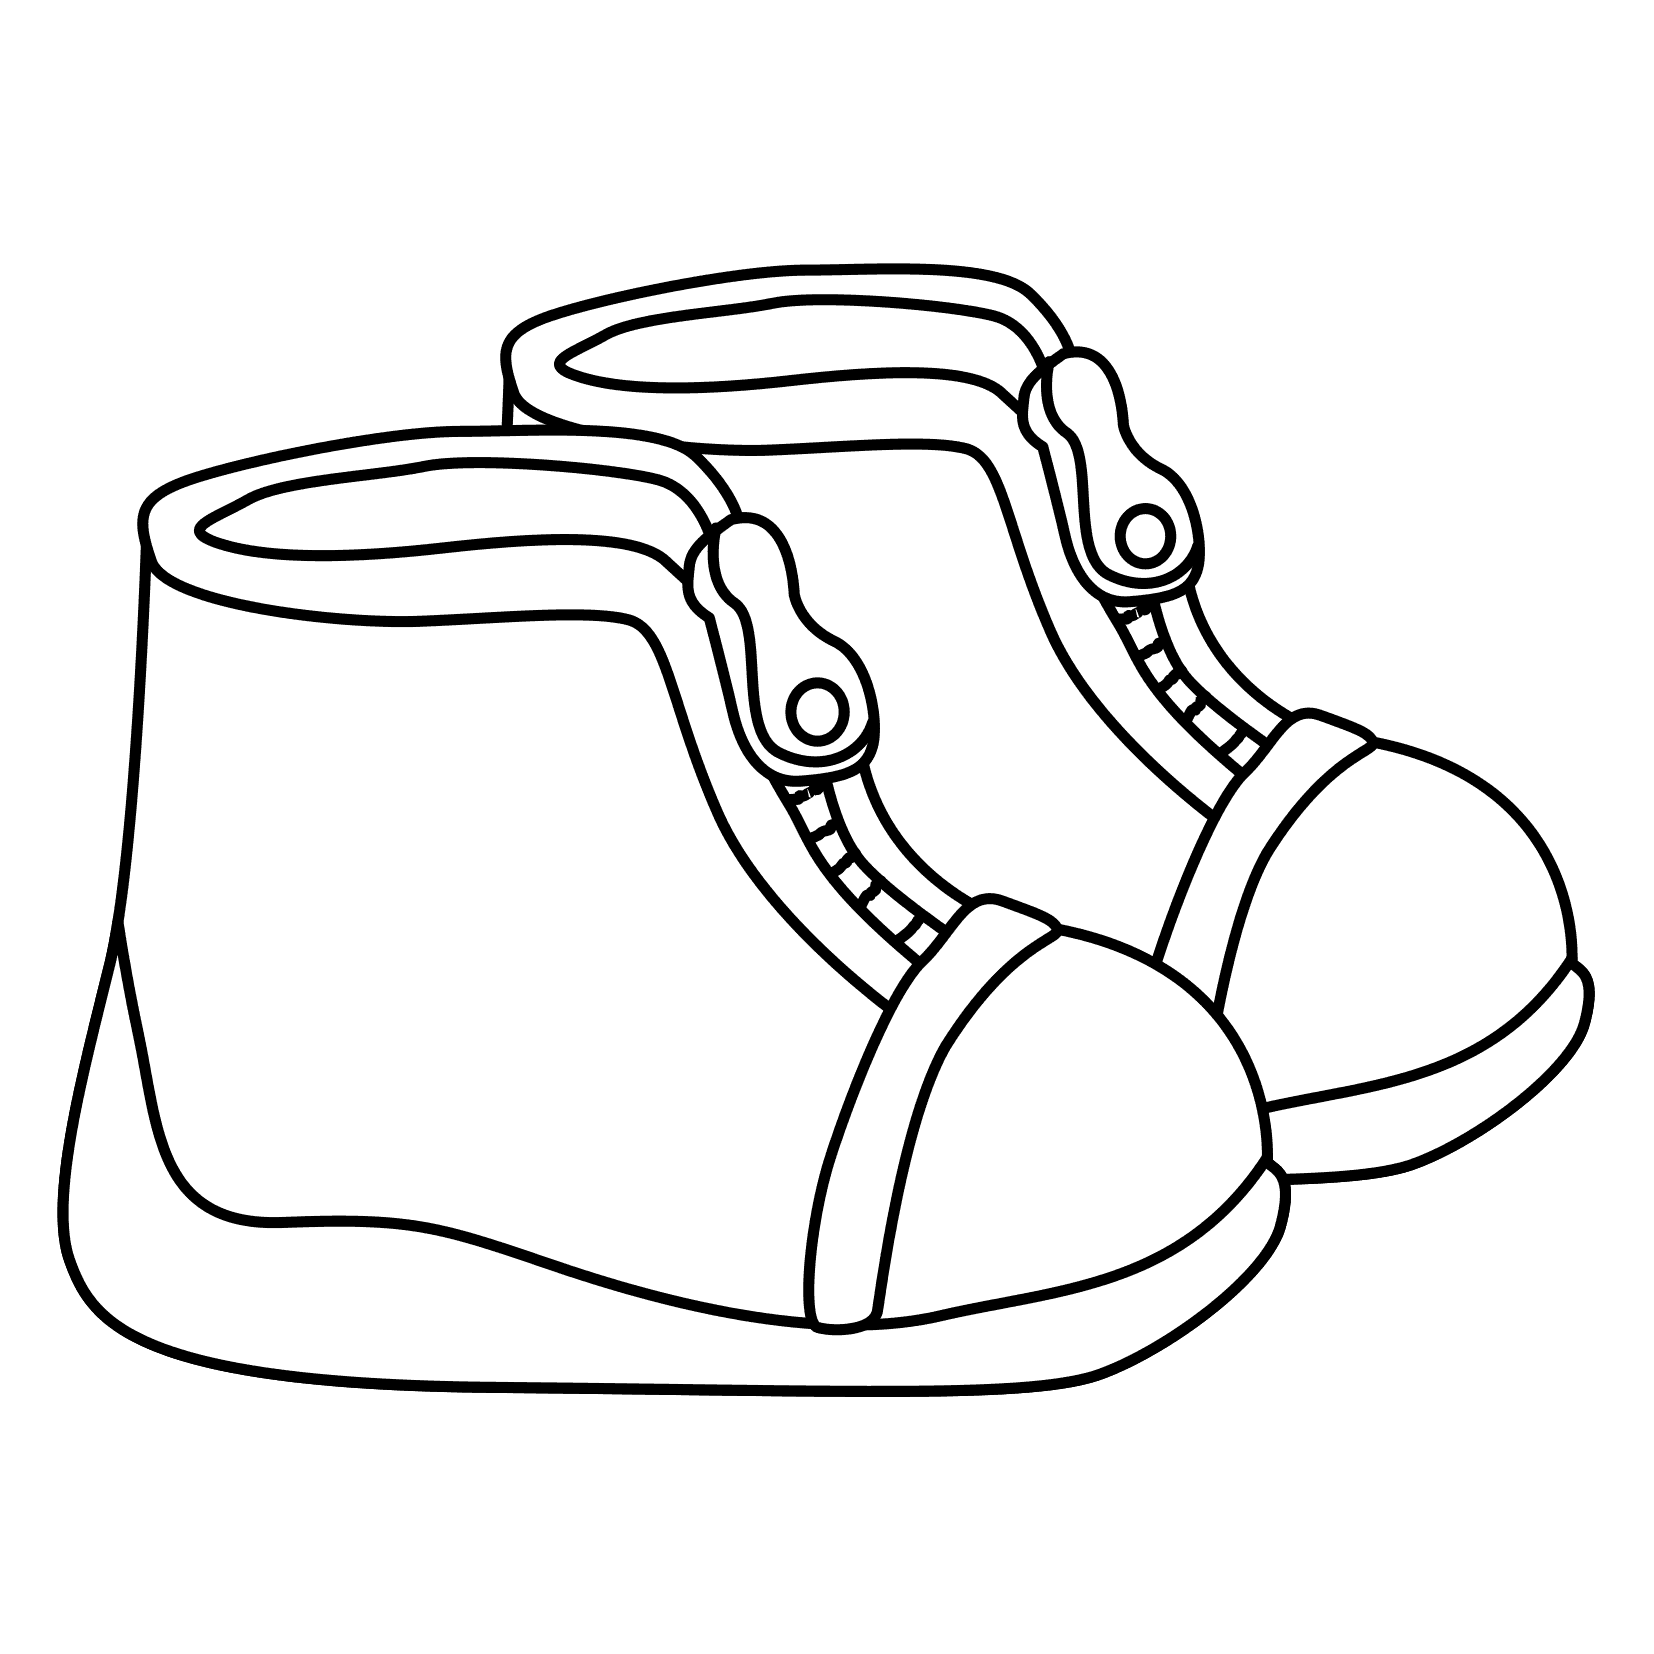 Shoe coloring pages to download and print for free